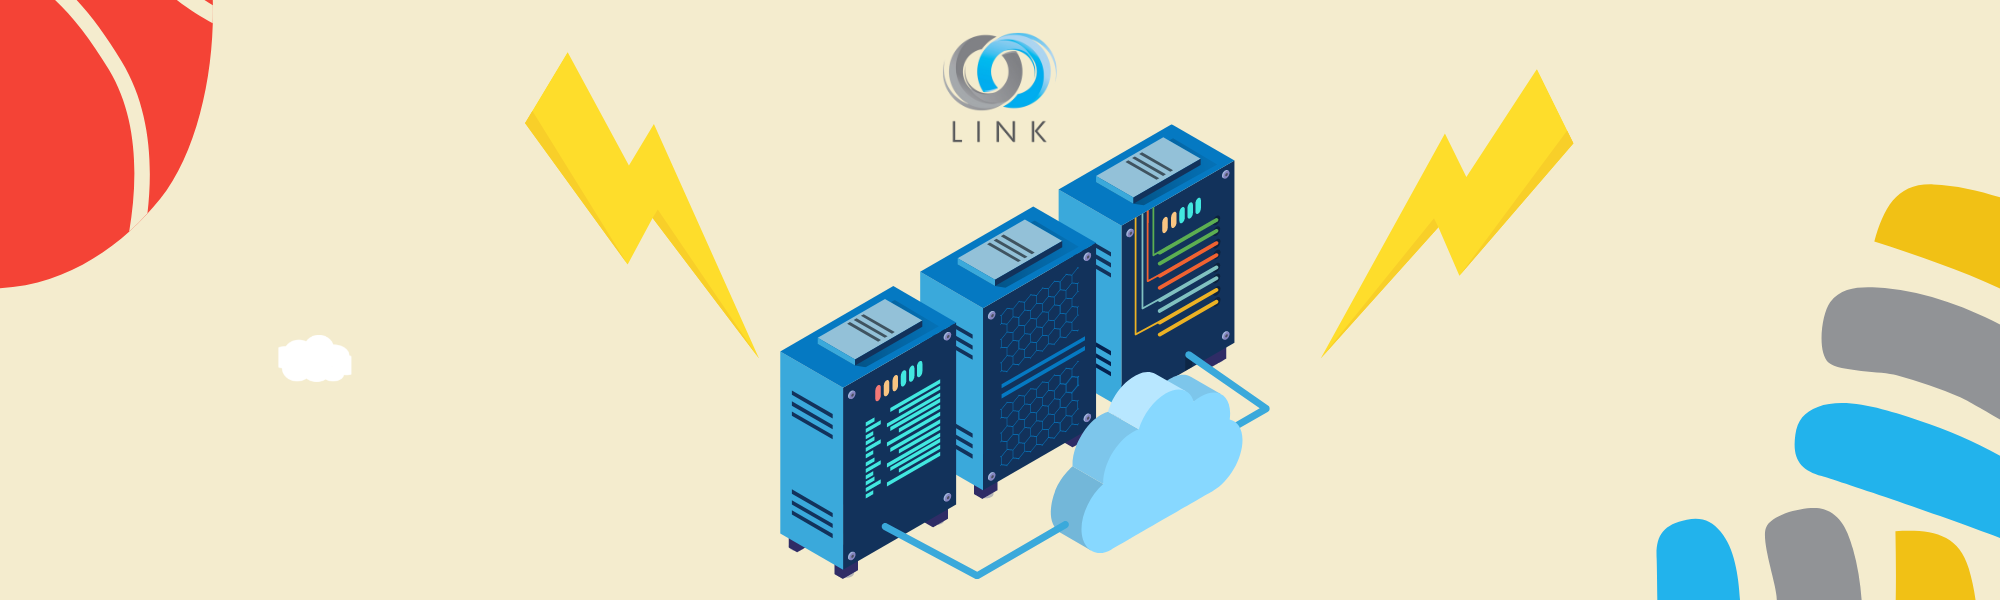 Lightning-Fast VPS in Iraq: Linkdata.com’s Top-Rated Solution